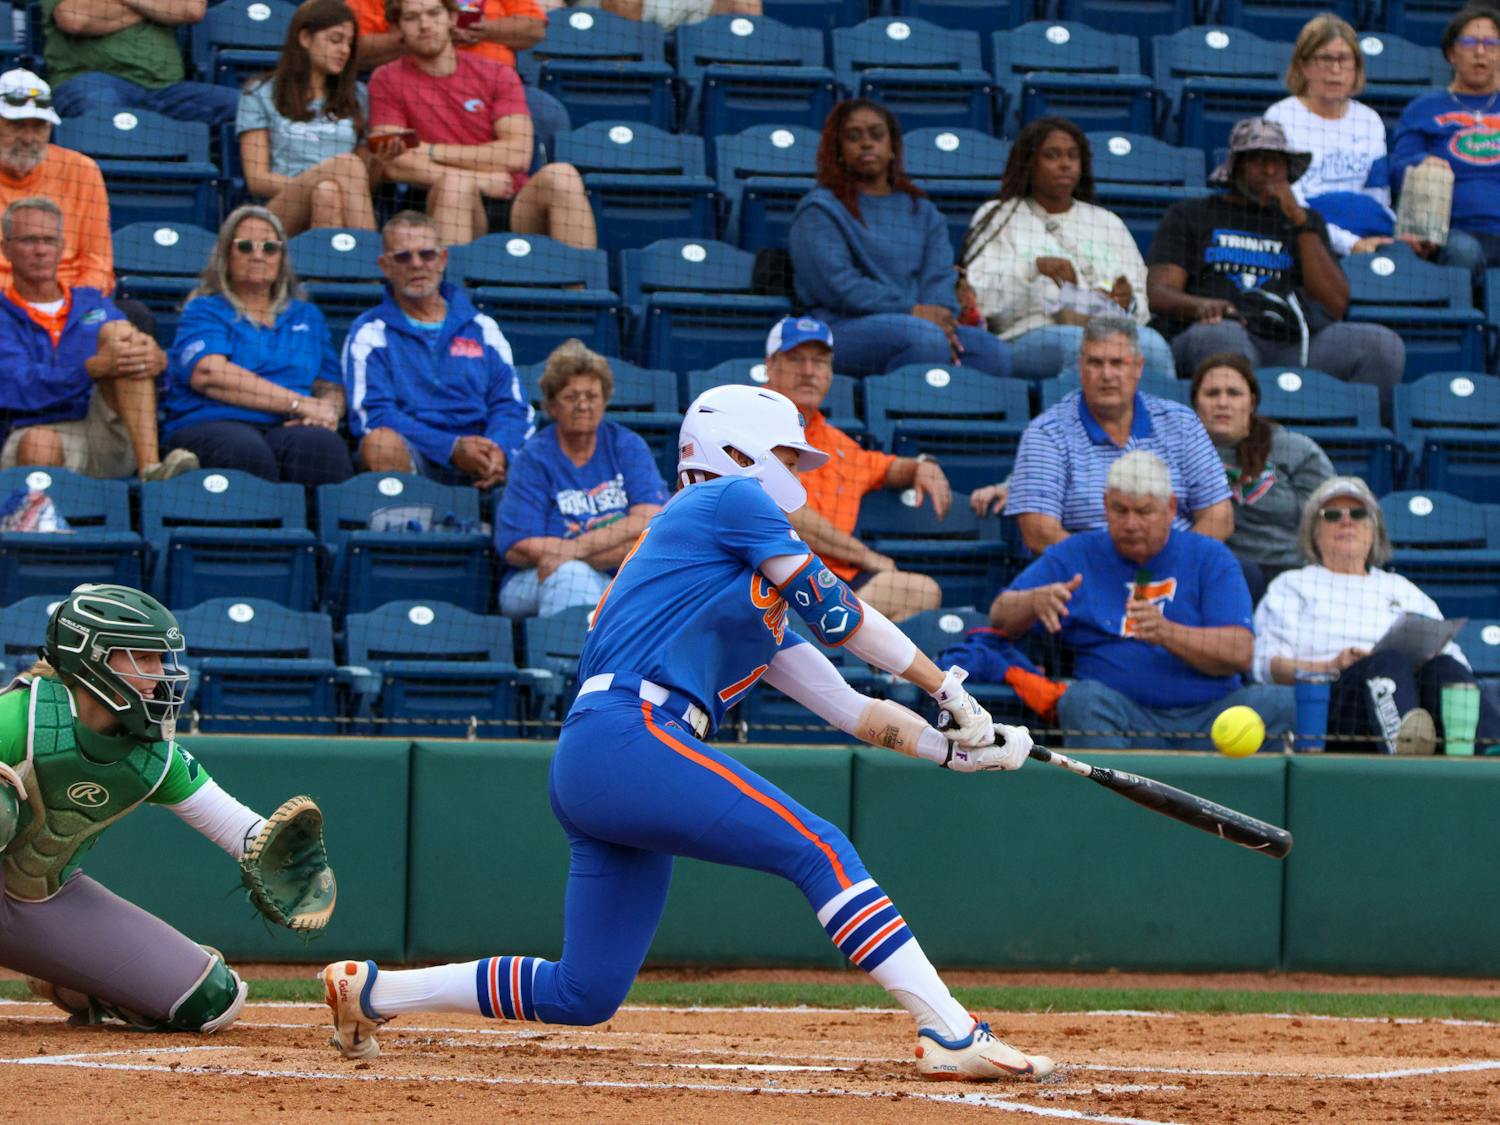 Florida shortstop Skylar Wallace swings her bat in the Gators' 8-0 mercy-rule victory over the Stetson Hatters Wednesday, March 29, 2023.